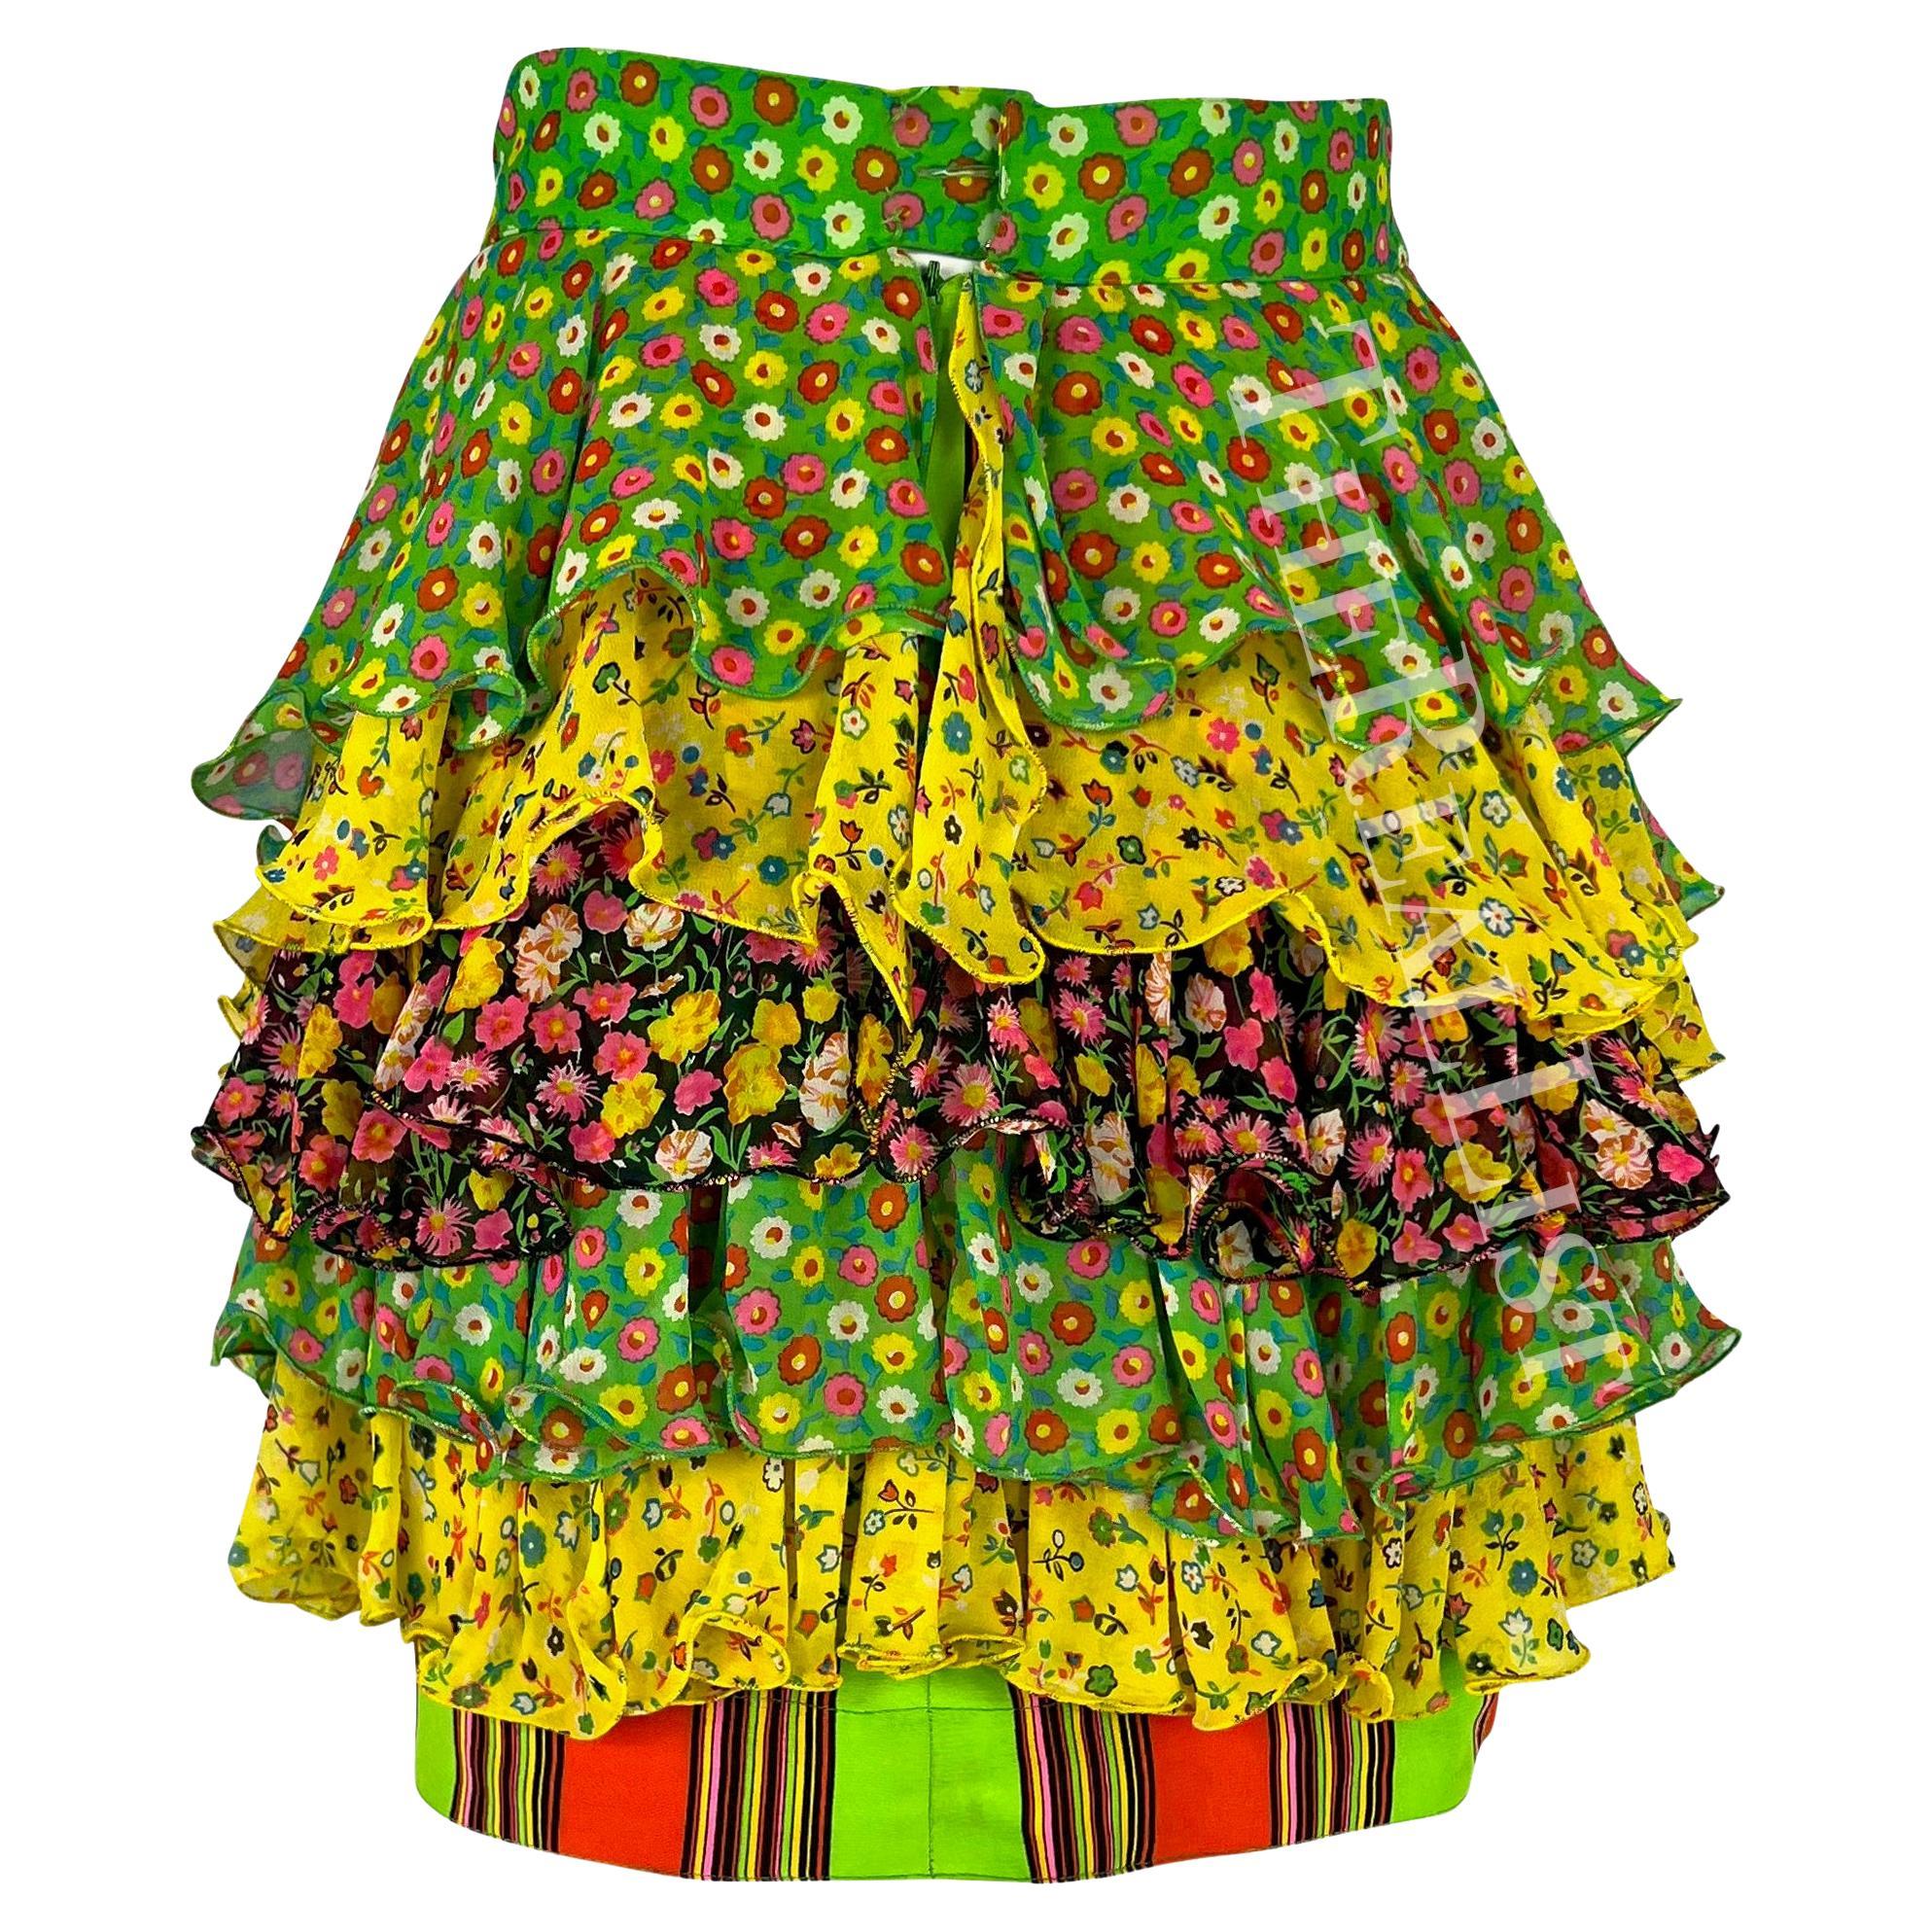 Women's S/S 1993 Gianni Versace Tiered Floral Multicolor Runway Mini Skirt For Sale